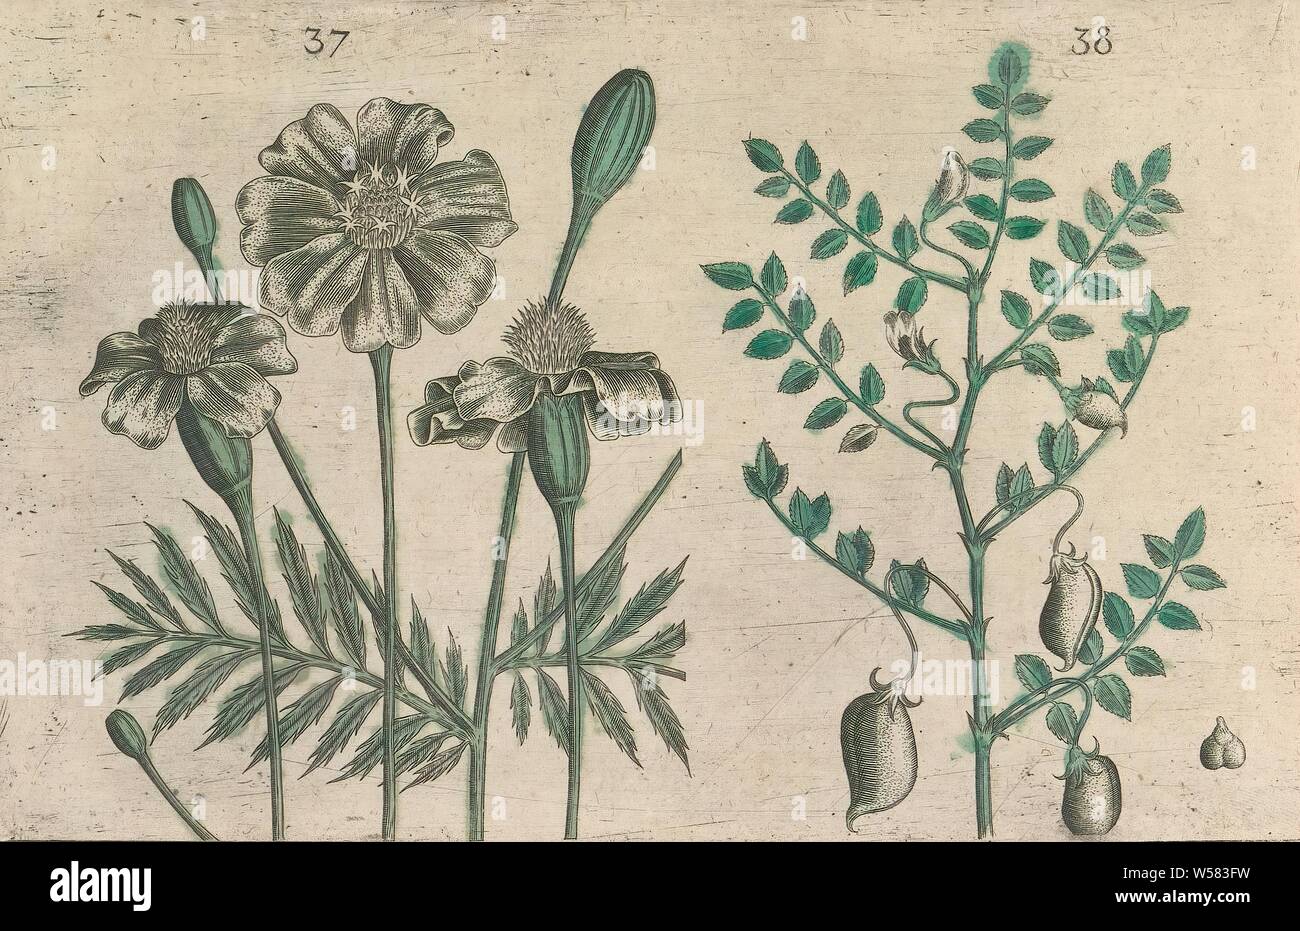 Tagetes patula and chickpea (Cicer arietinum), tagetes and chickpea. FIGs. 37 and 38 on a leaf numbered by hand 20. In: Anselmi Boetii de Boot I.C. Brugensis & Rodolphi II. Imp. Novel. medici a cubiculis Florum, Herbarum, ac fructuum selectiorum icones, & vires pleraeque hactenus ignotæ. Part of the album with sheets and plates from De Boodt's herbarium from 1640. The twelfth of twelve albums with watercolors of animals, birds and plants known around 1600, commissioned by emperor Rudolf II, flowers (with NAME), anonymous, 1604 - 1632 and/or 1640, paper, ink, watercolor (paint), engraving Stock Photo